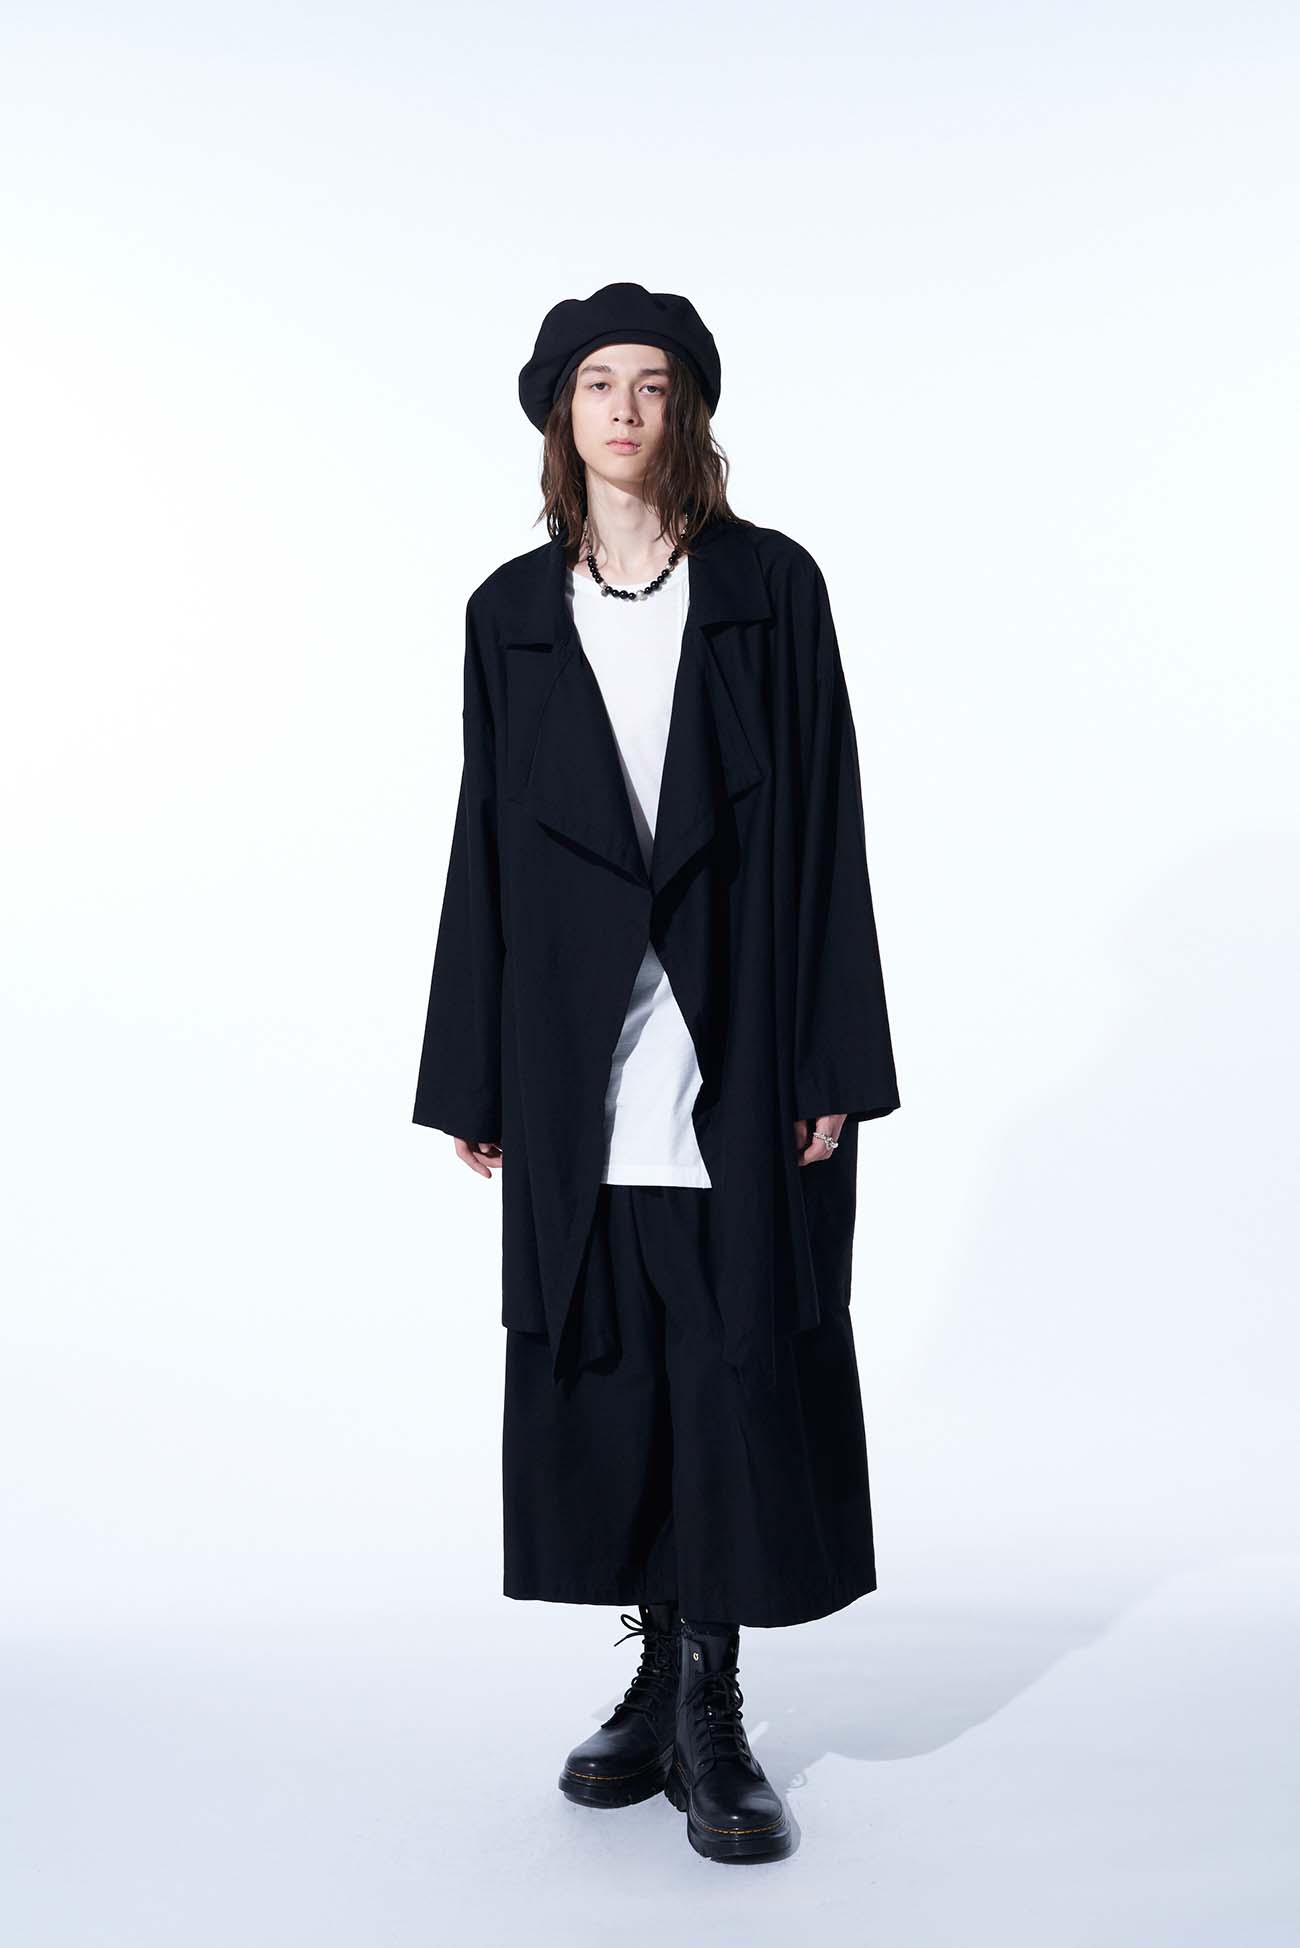 COTTON TWILL CROPPED WIDE PANTS WITH GUSSETED FLAP POCKET